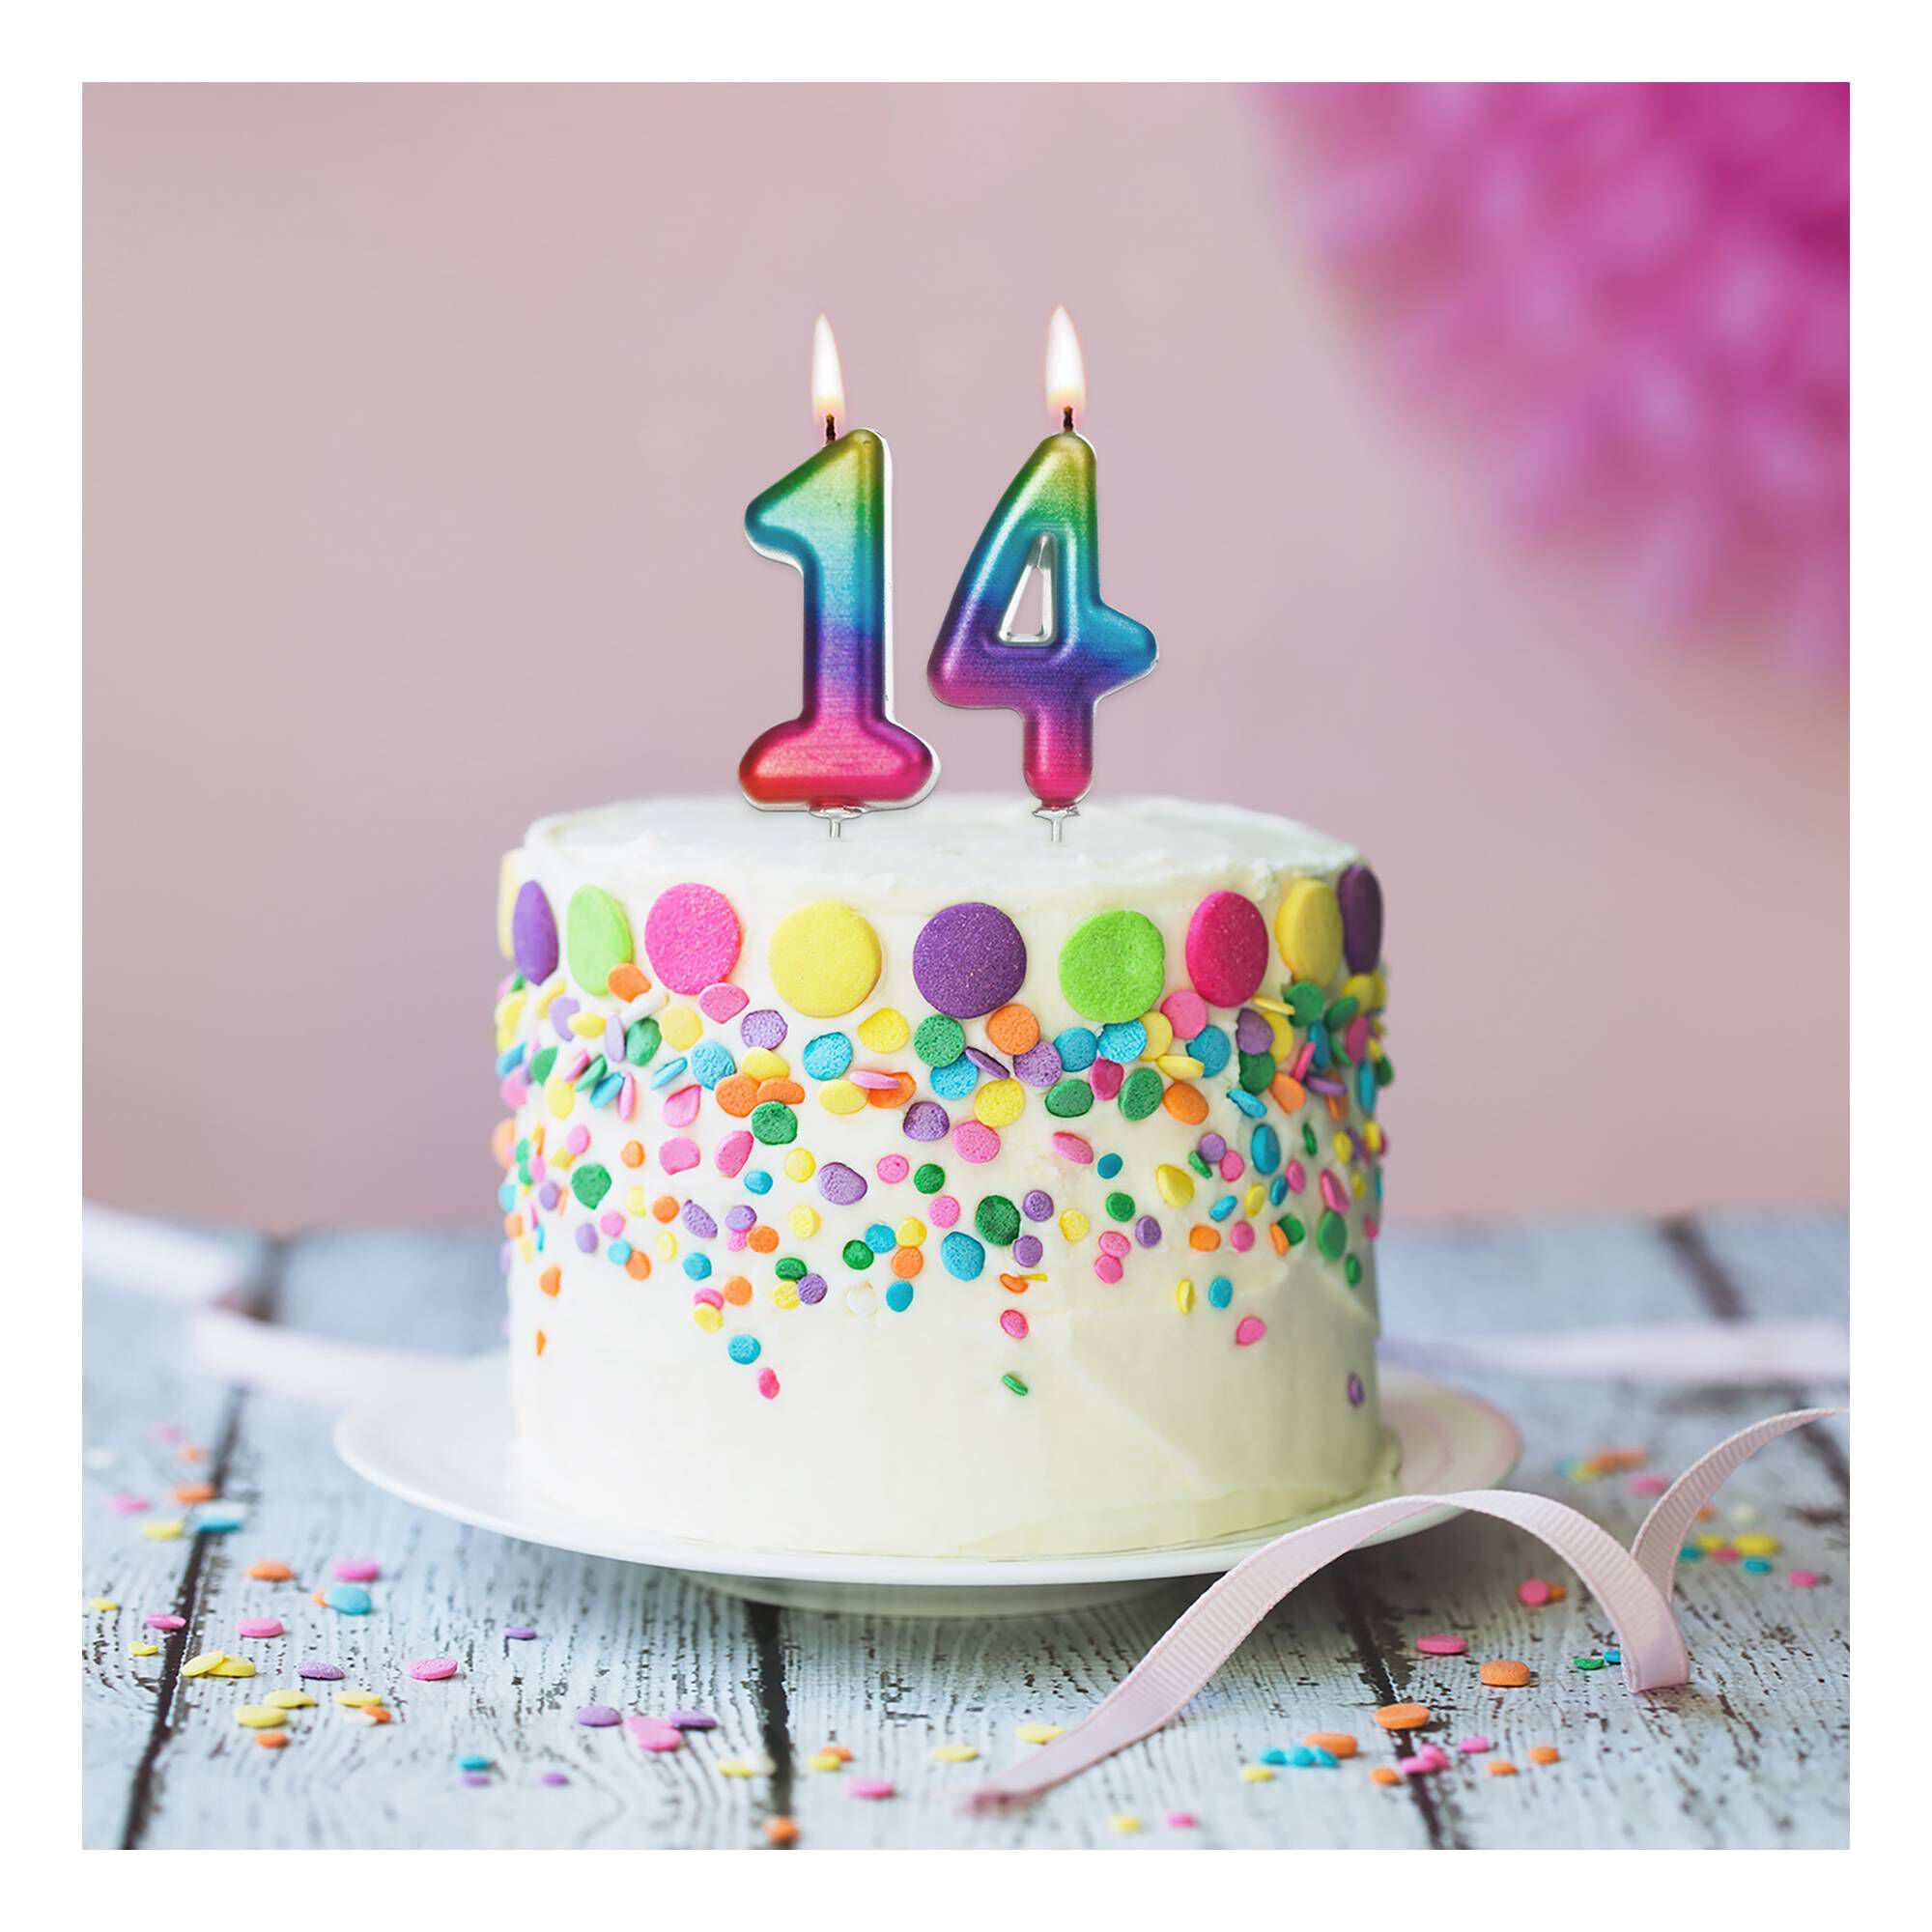 Birthday Candles Numbers 8, Butterfly Candles Birthday, Personalised  Birthday Candles Children, Pink Cake Decoration 8th Birthday, Glittering  Cake Decoration for Children's Birthday, Adult Anniversary : Amazon.ae:  Arts & Crafts